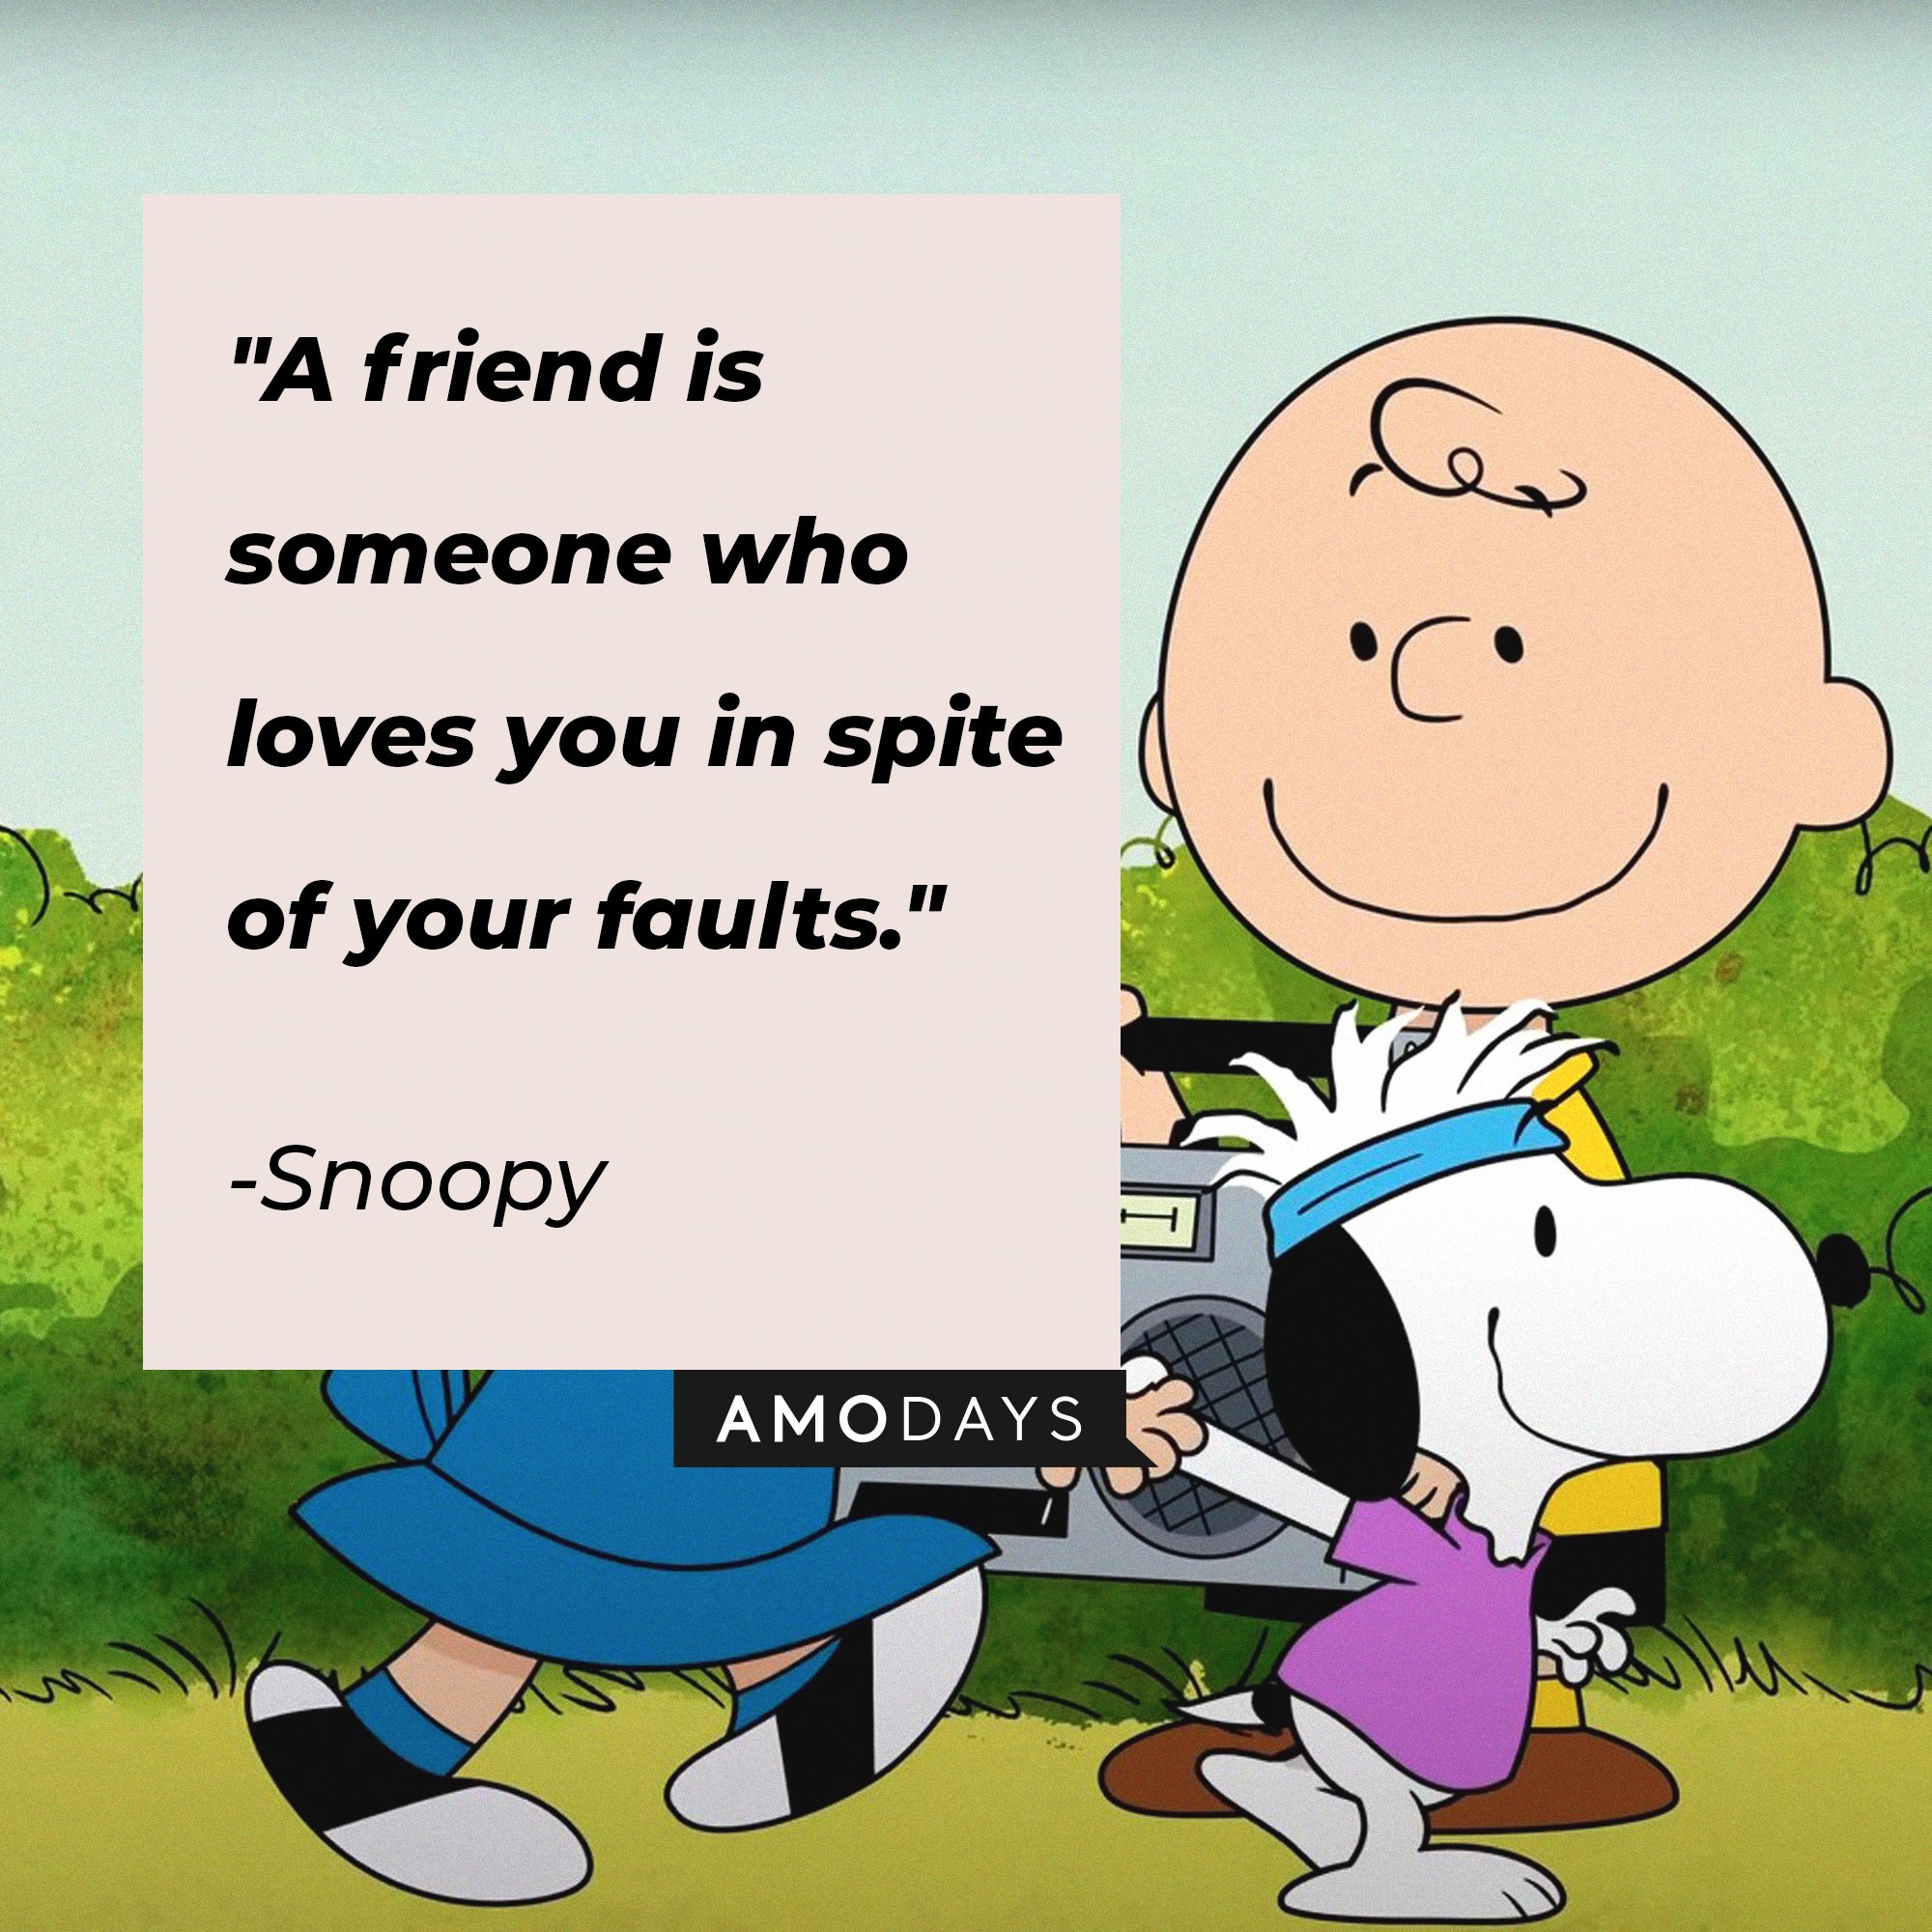 Snoopy’s quote: "A friend is someone who loves you in spite of your faults." | Image: AmoDays 